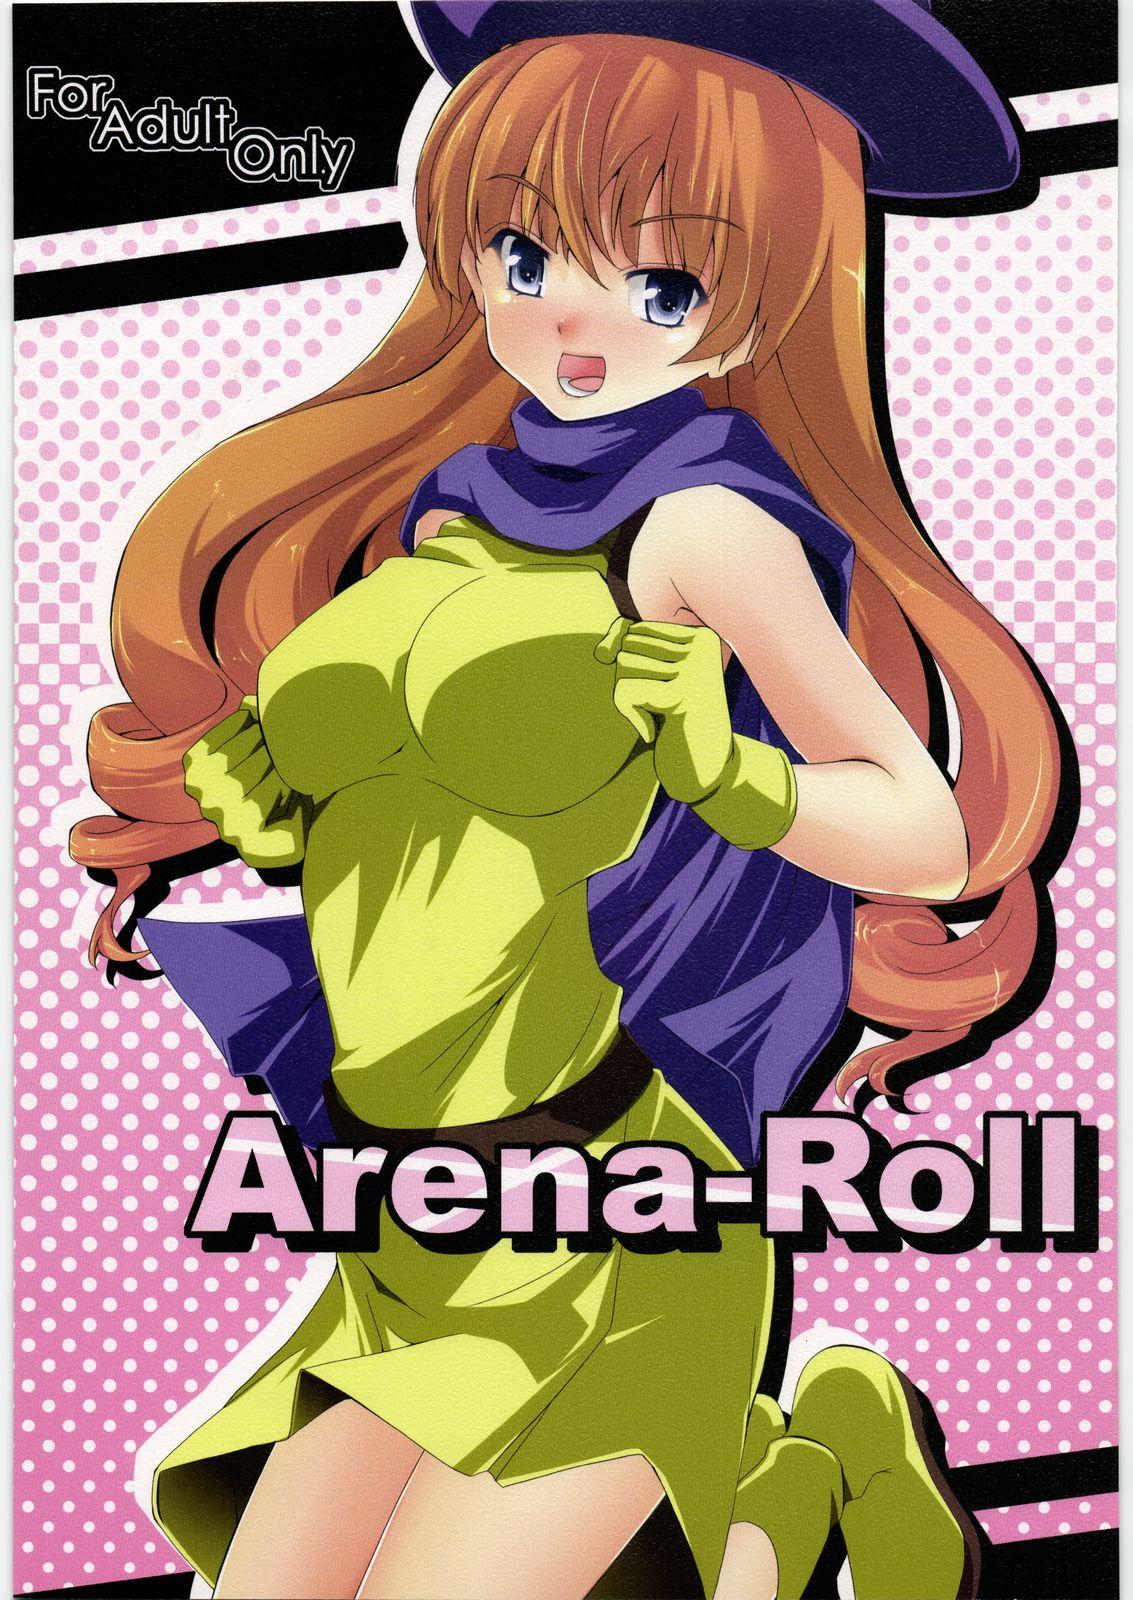 Women Arena-Roll - Dragon quest iv Highheels - Picture 1